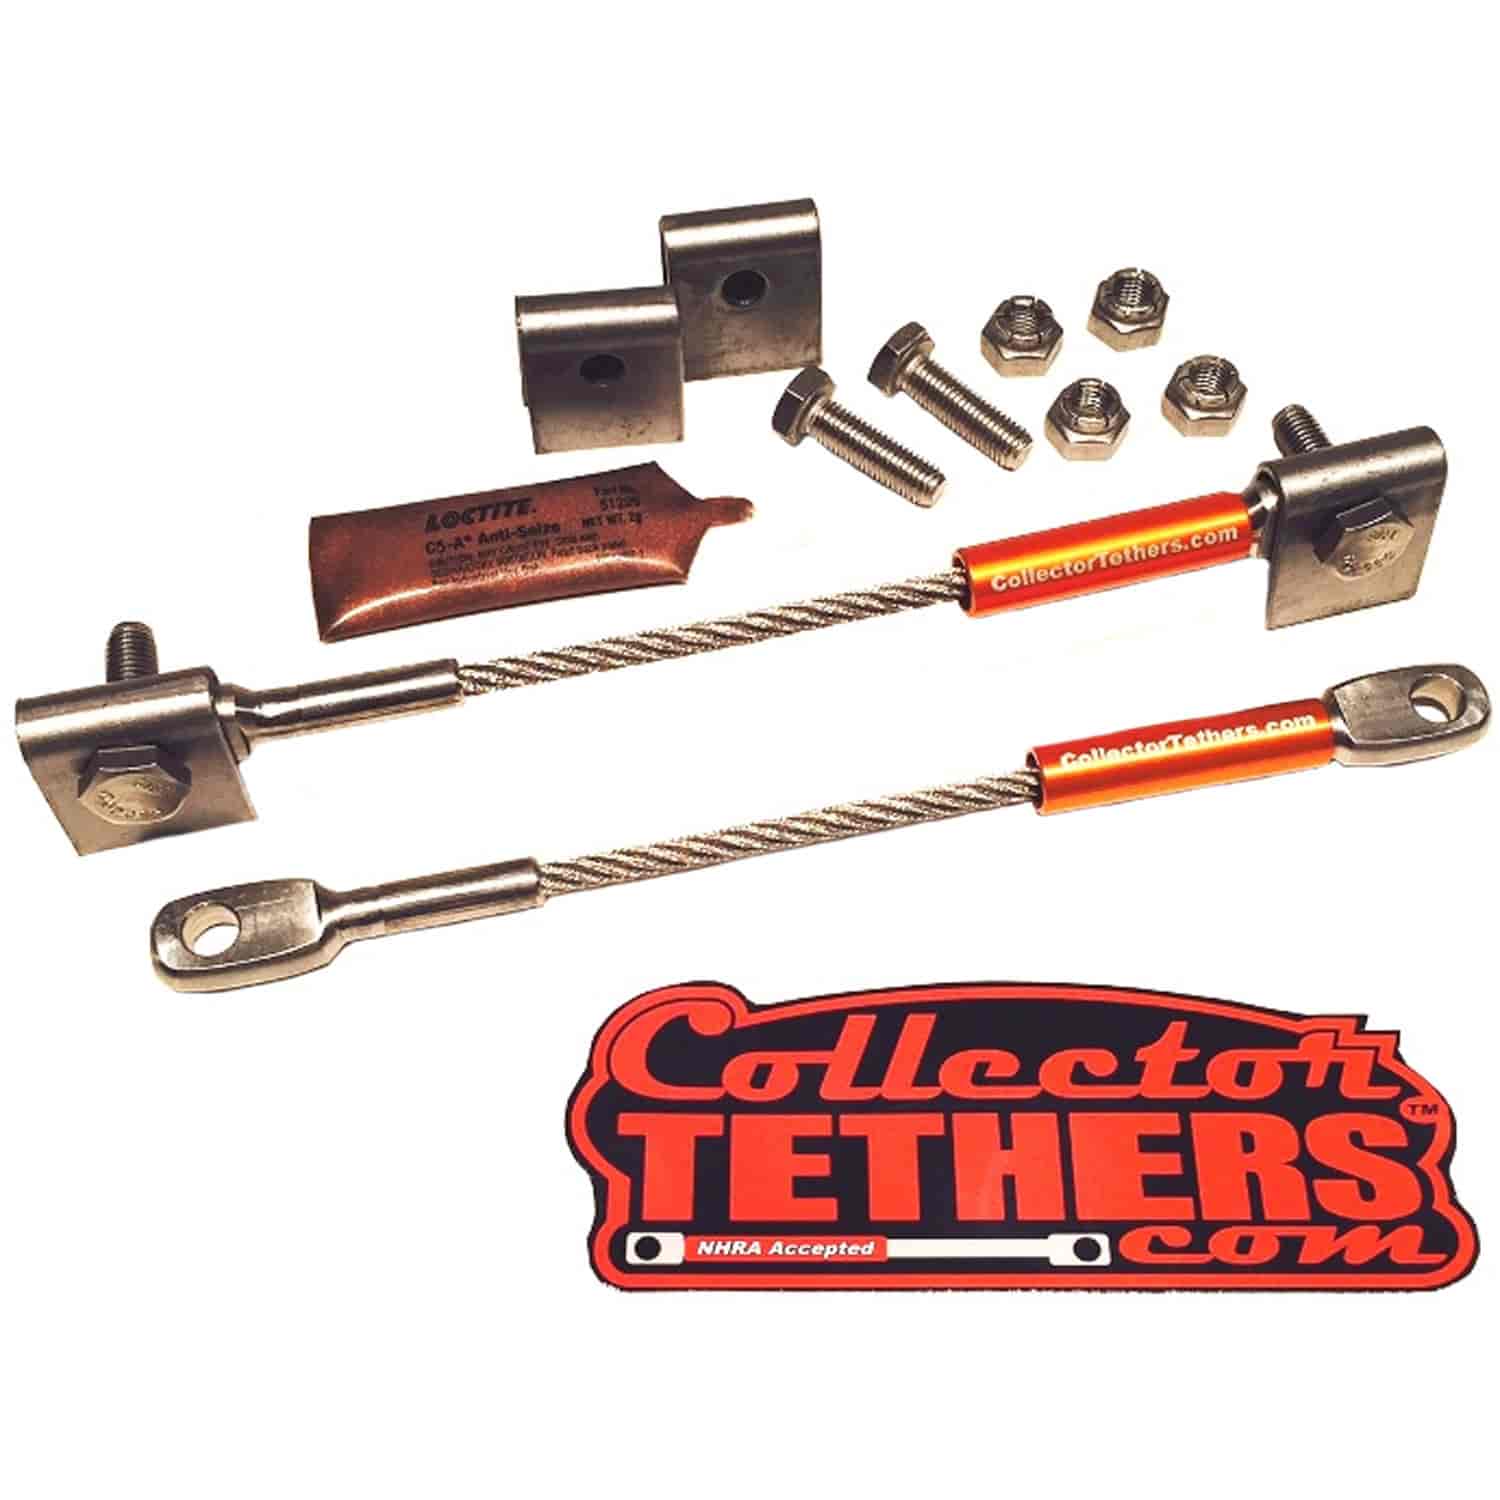 Weld On Collector Tether Kit Stainless Steel Brackets